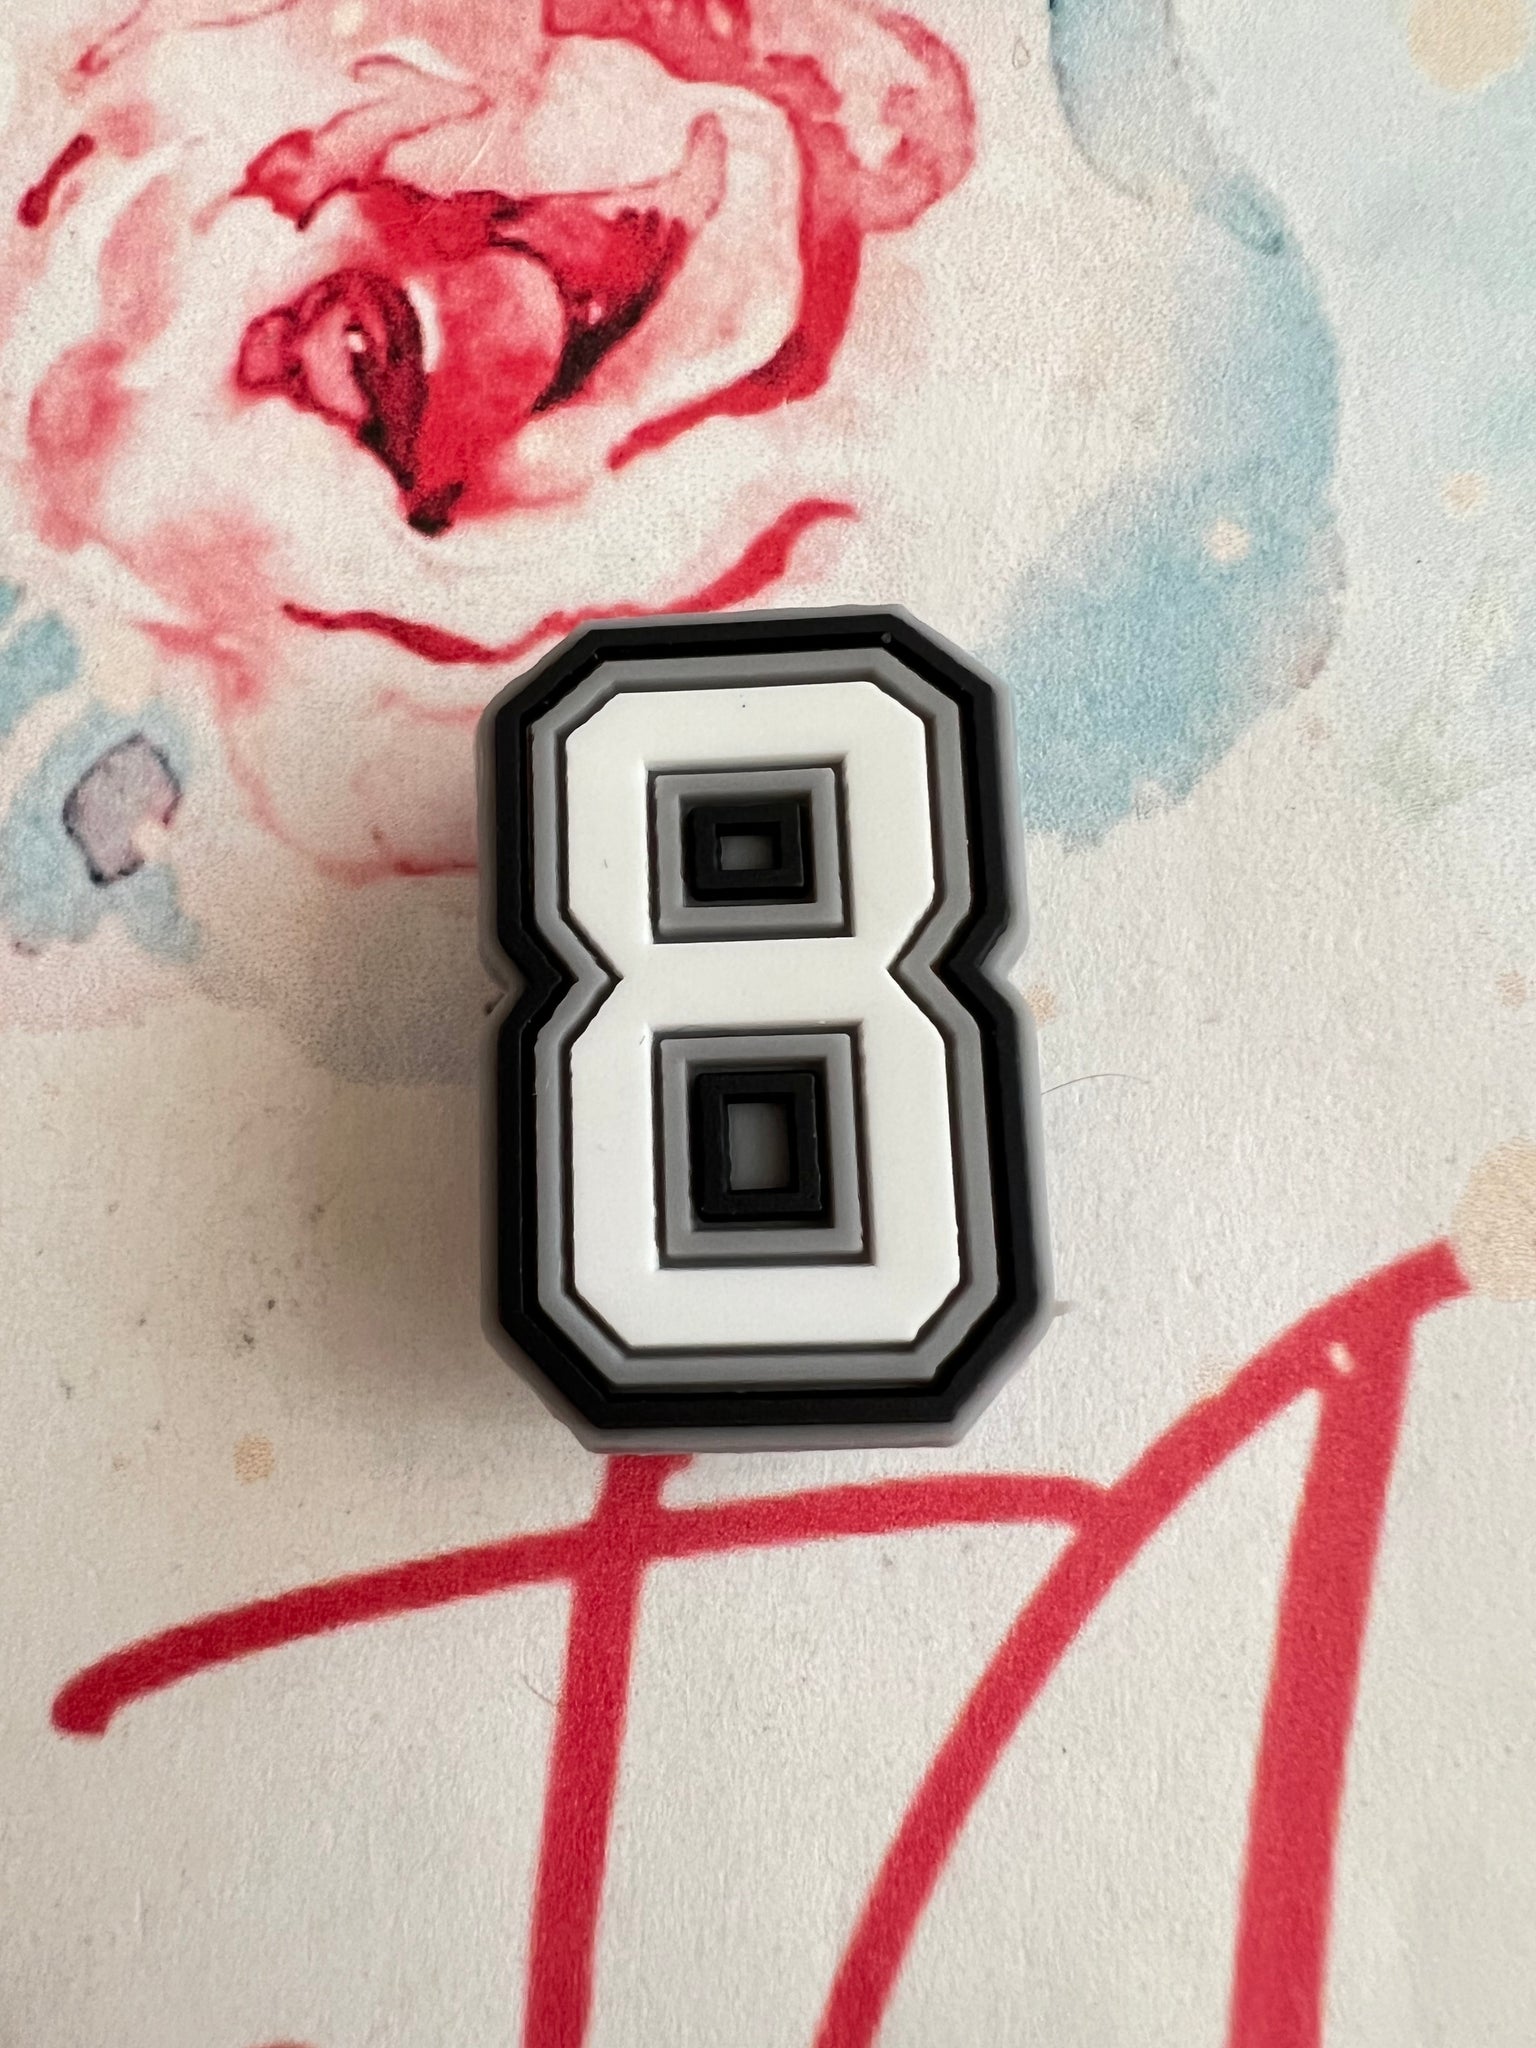 Varsity letters/number Charms